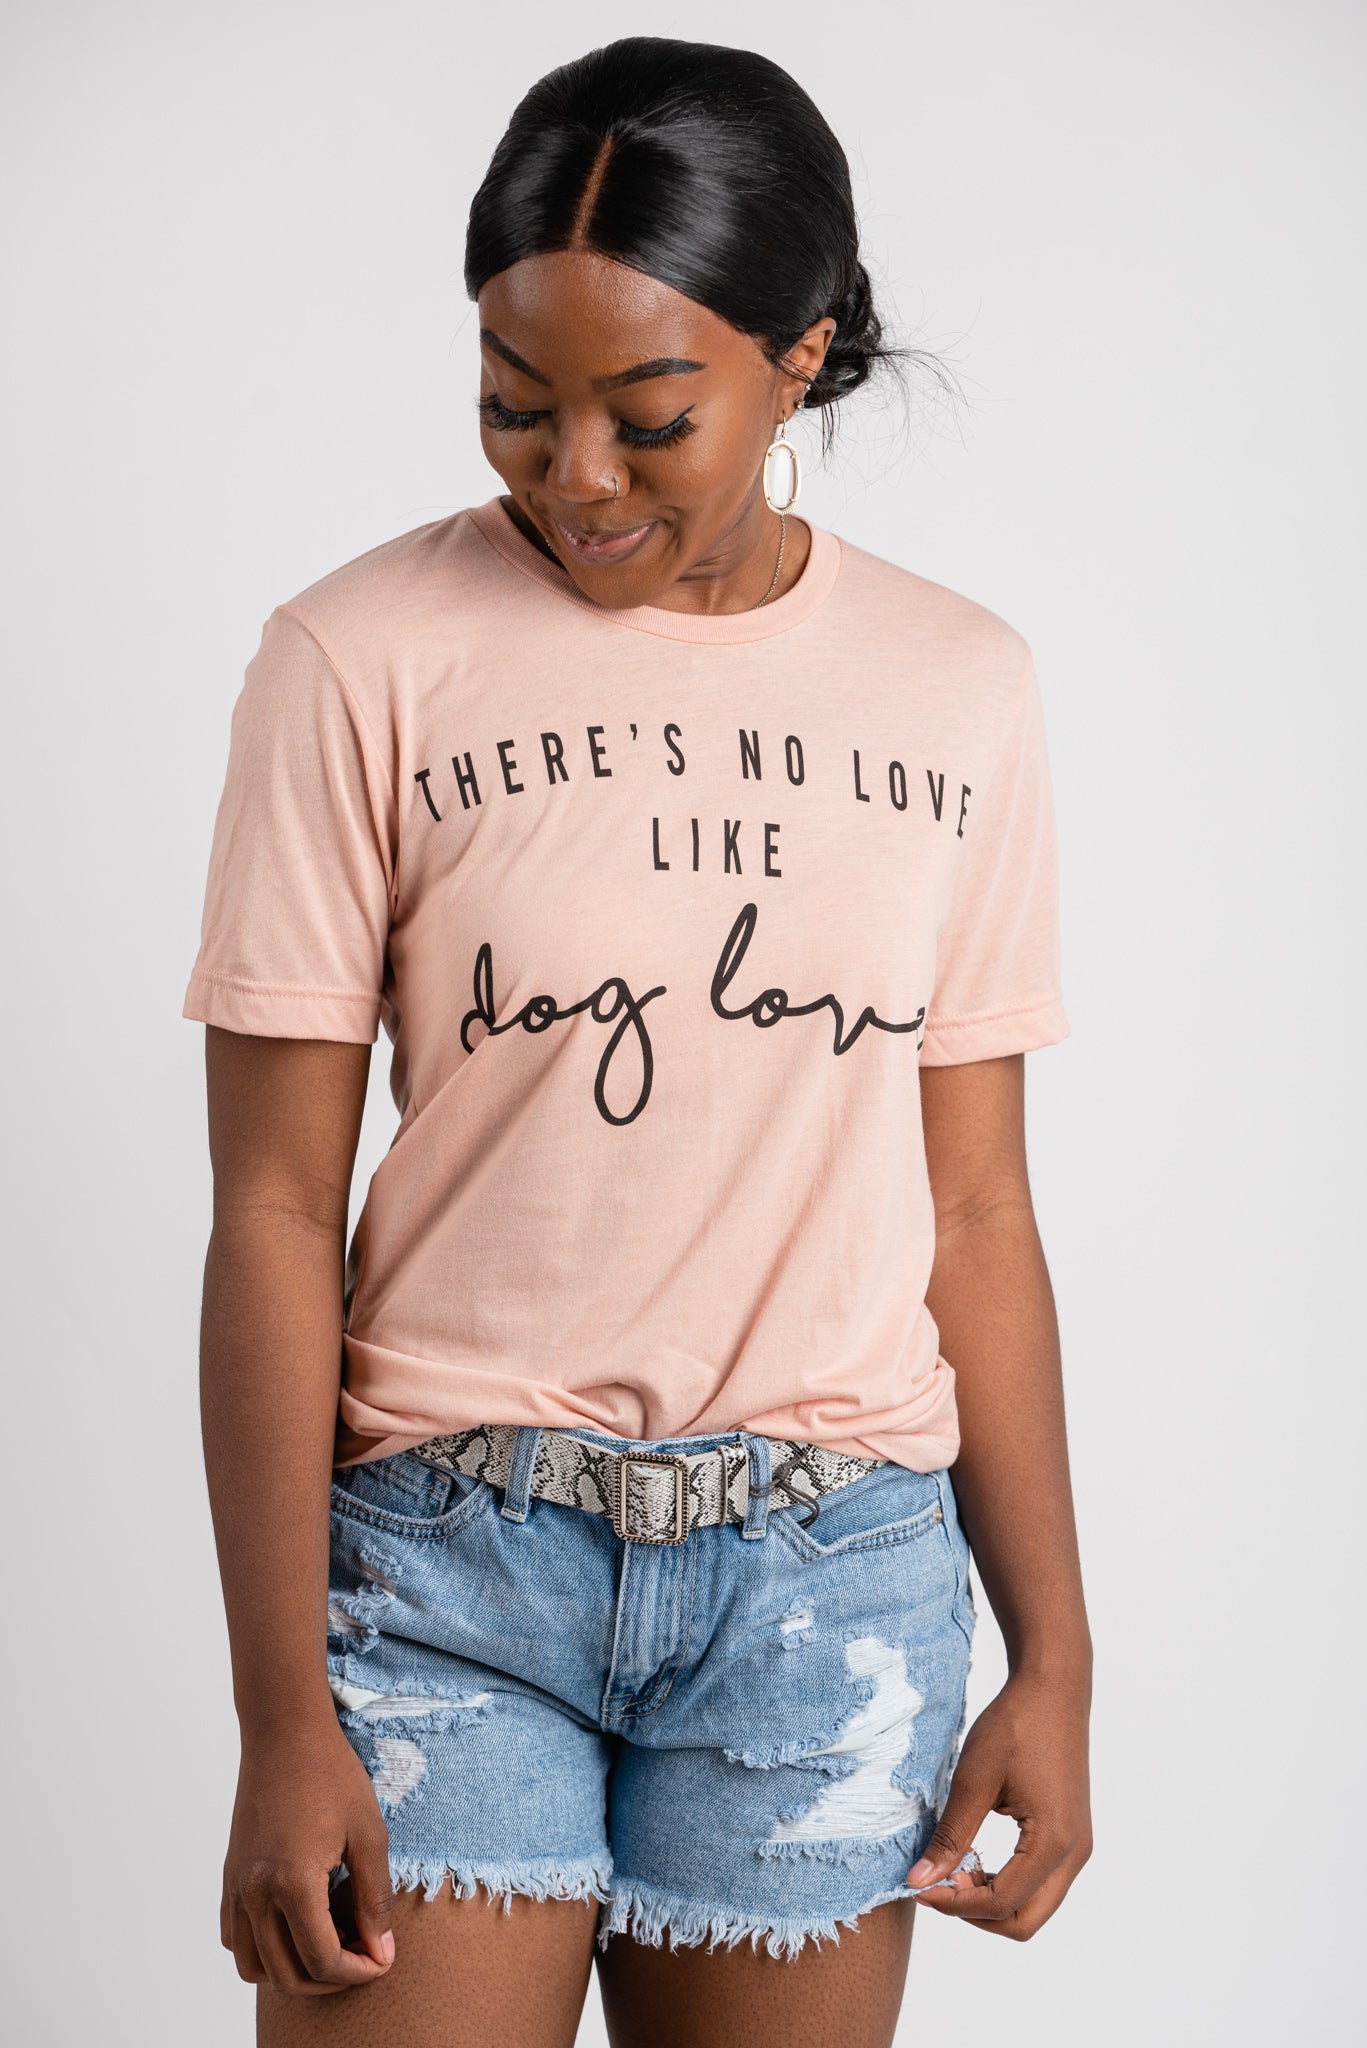 There's no love like dog love unisex short sleeve t-shirt peach - Cute T-shirts - Funny T-Shirts at Lush Fashion Lounge Boutique in Oklahoma City